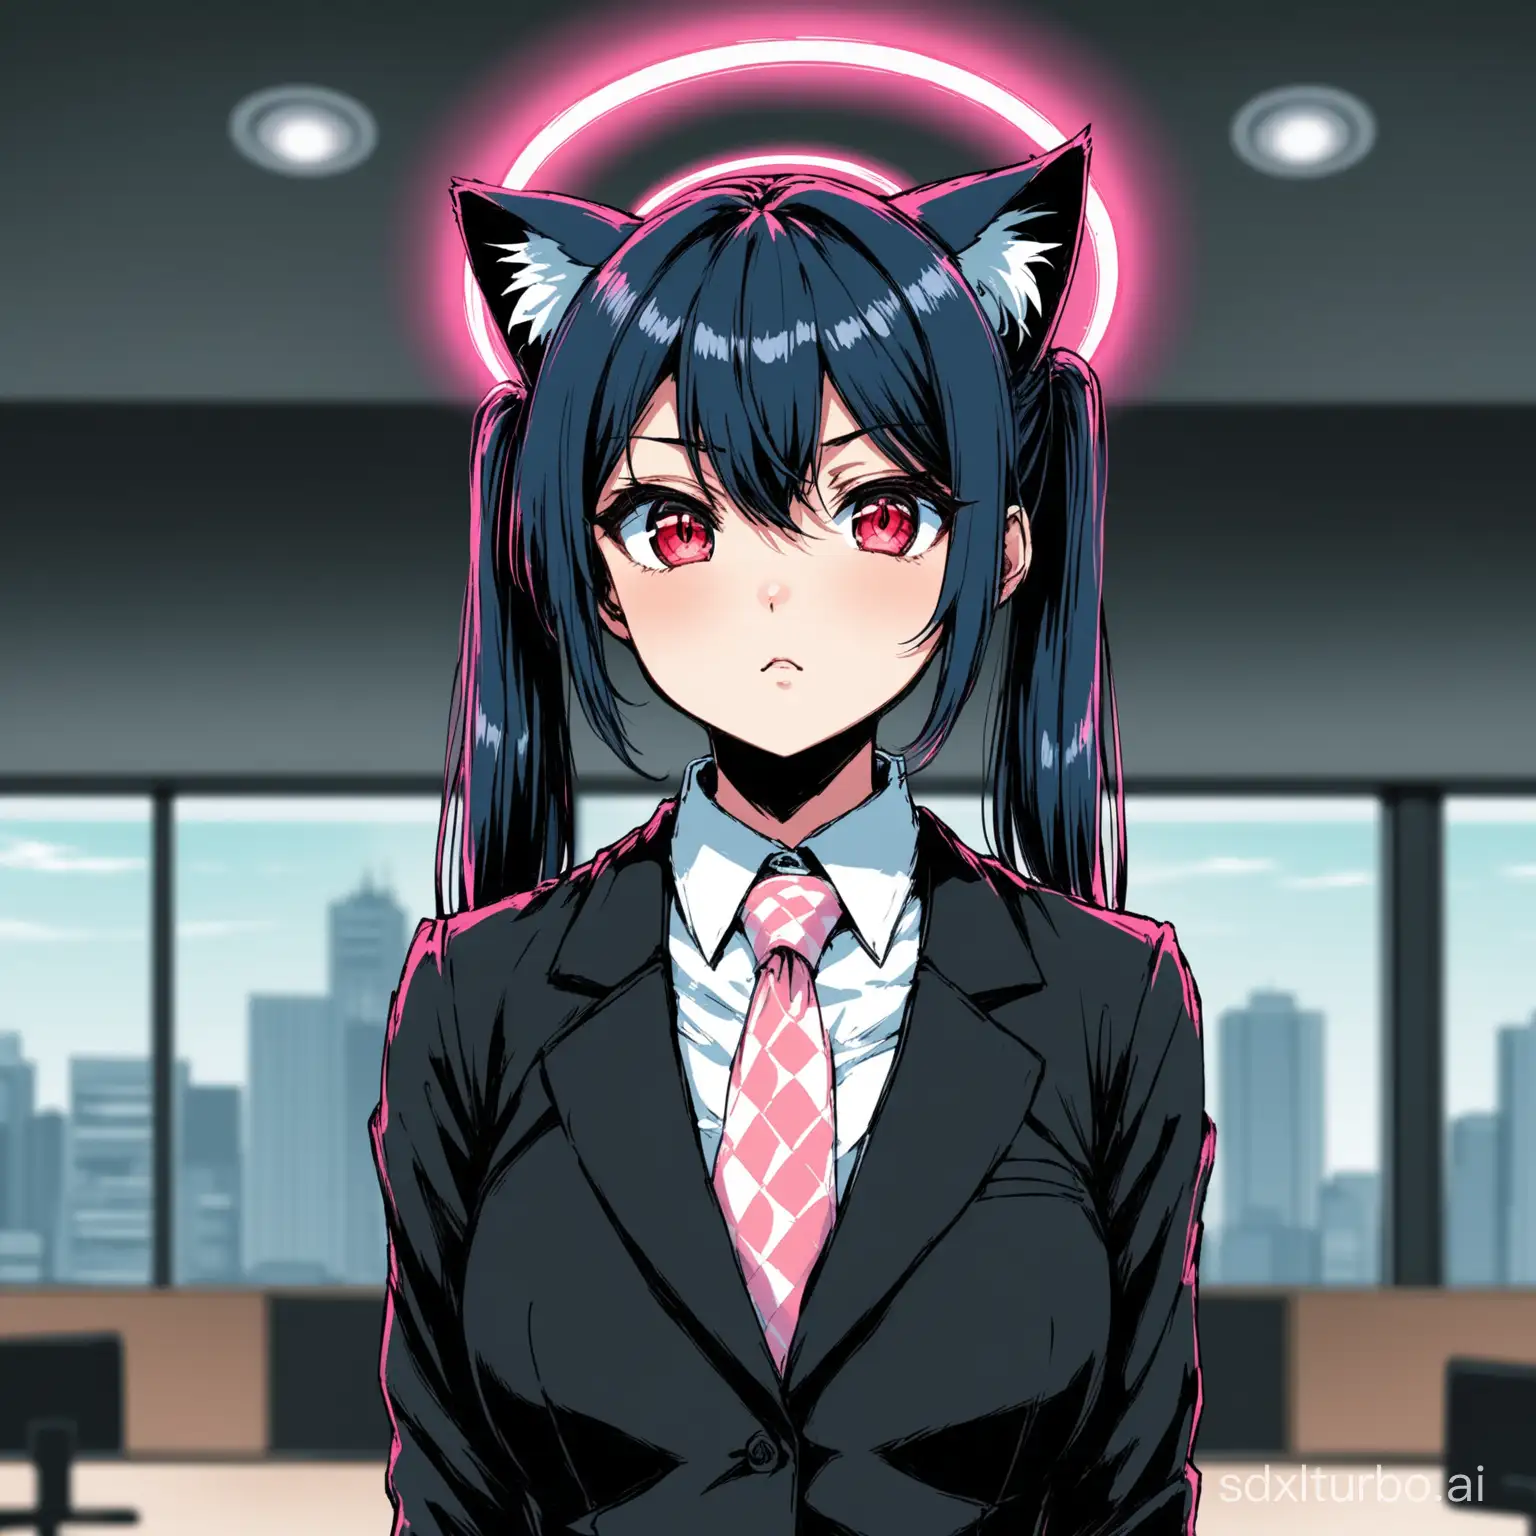 1girl, rough style, pen drawing style, anime style, low saturation, cat ears, thin twintails,  light blue necktie, dark blue hair, small glowing pink round halo hovers overhead,, red eyes, black suit jacket, buttoned jacket, red gloves, black checkered skirt, office background